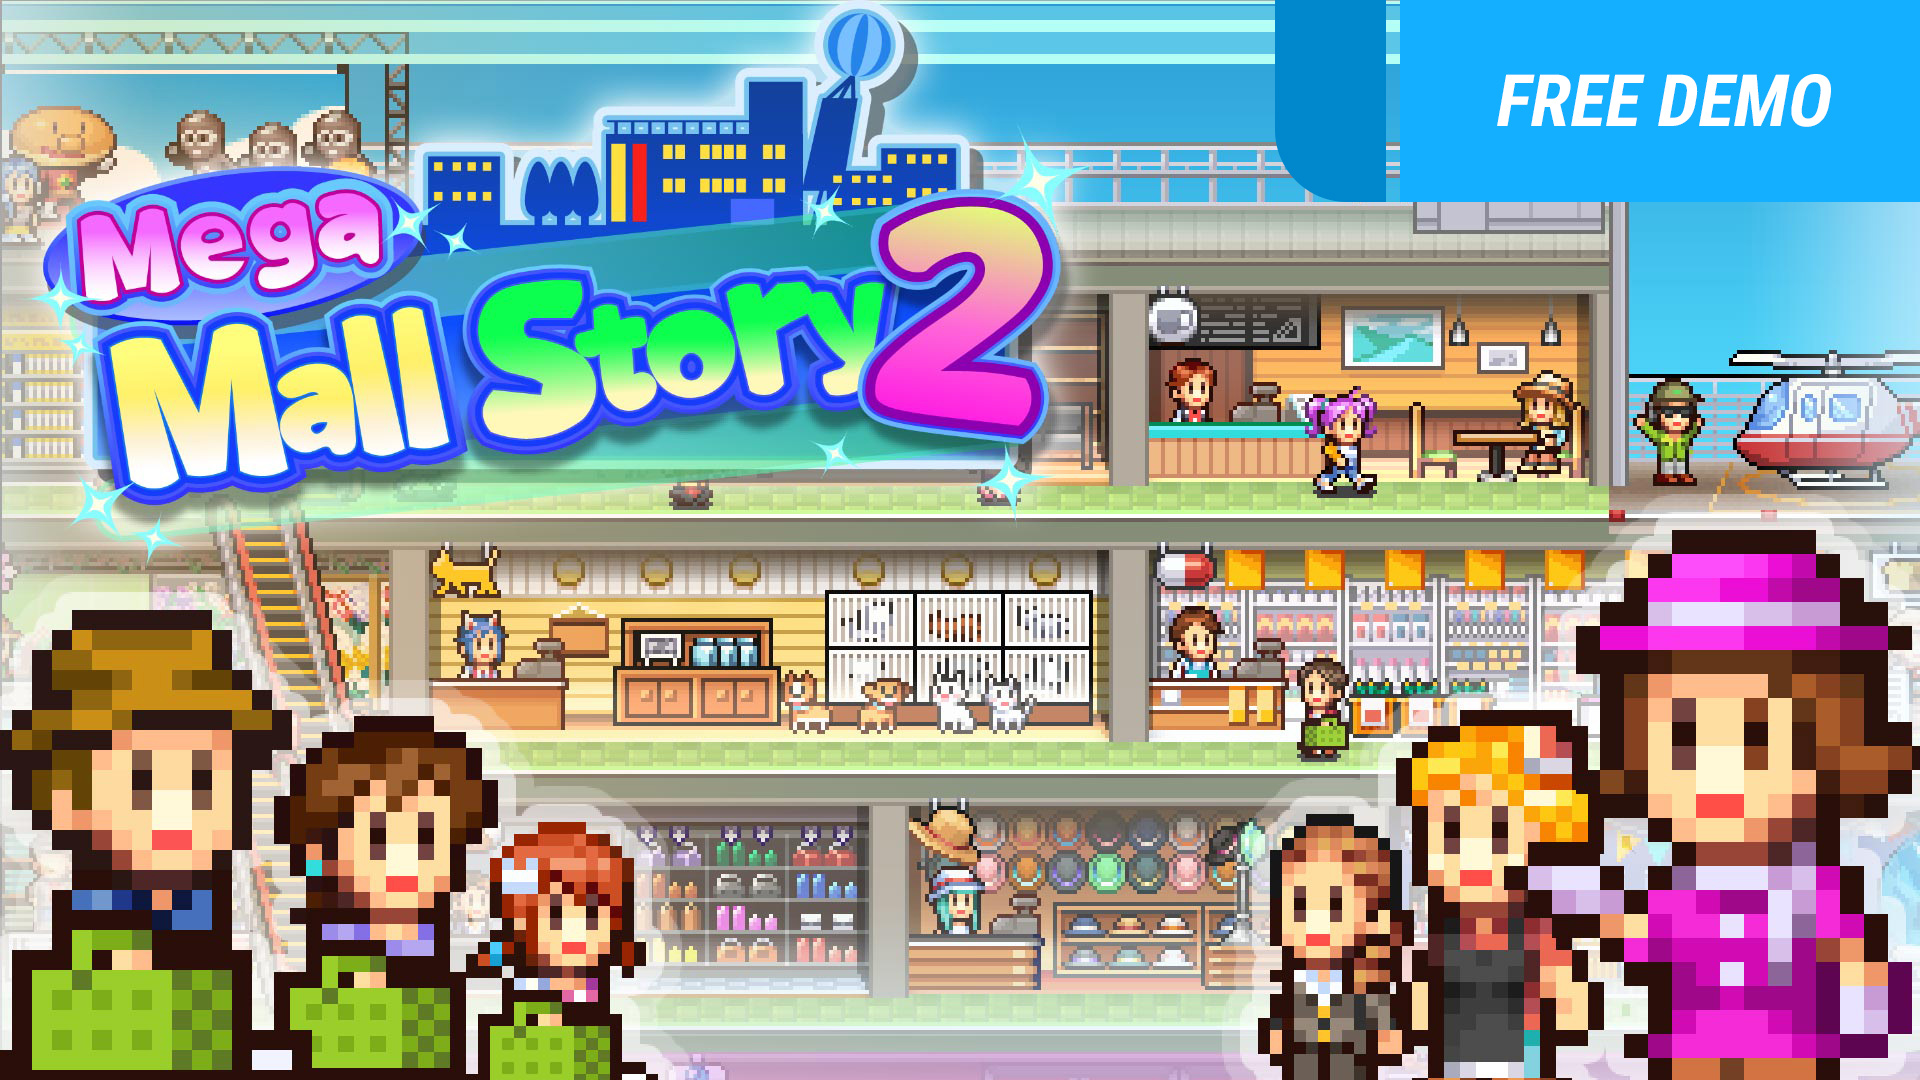 Mega Mall Story': A Satisfying Game About Shopping Sprees